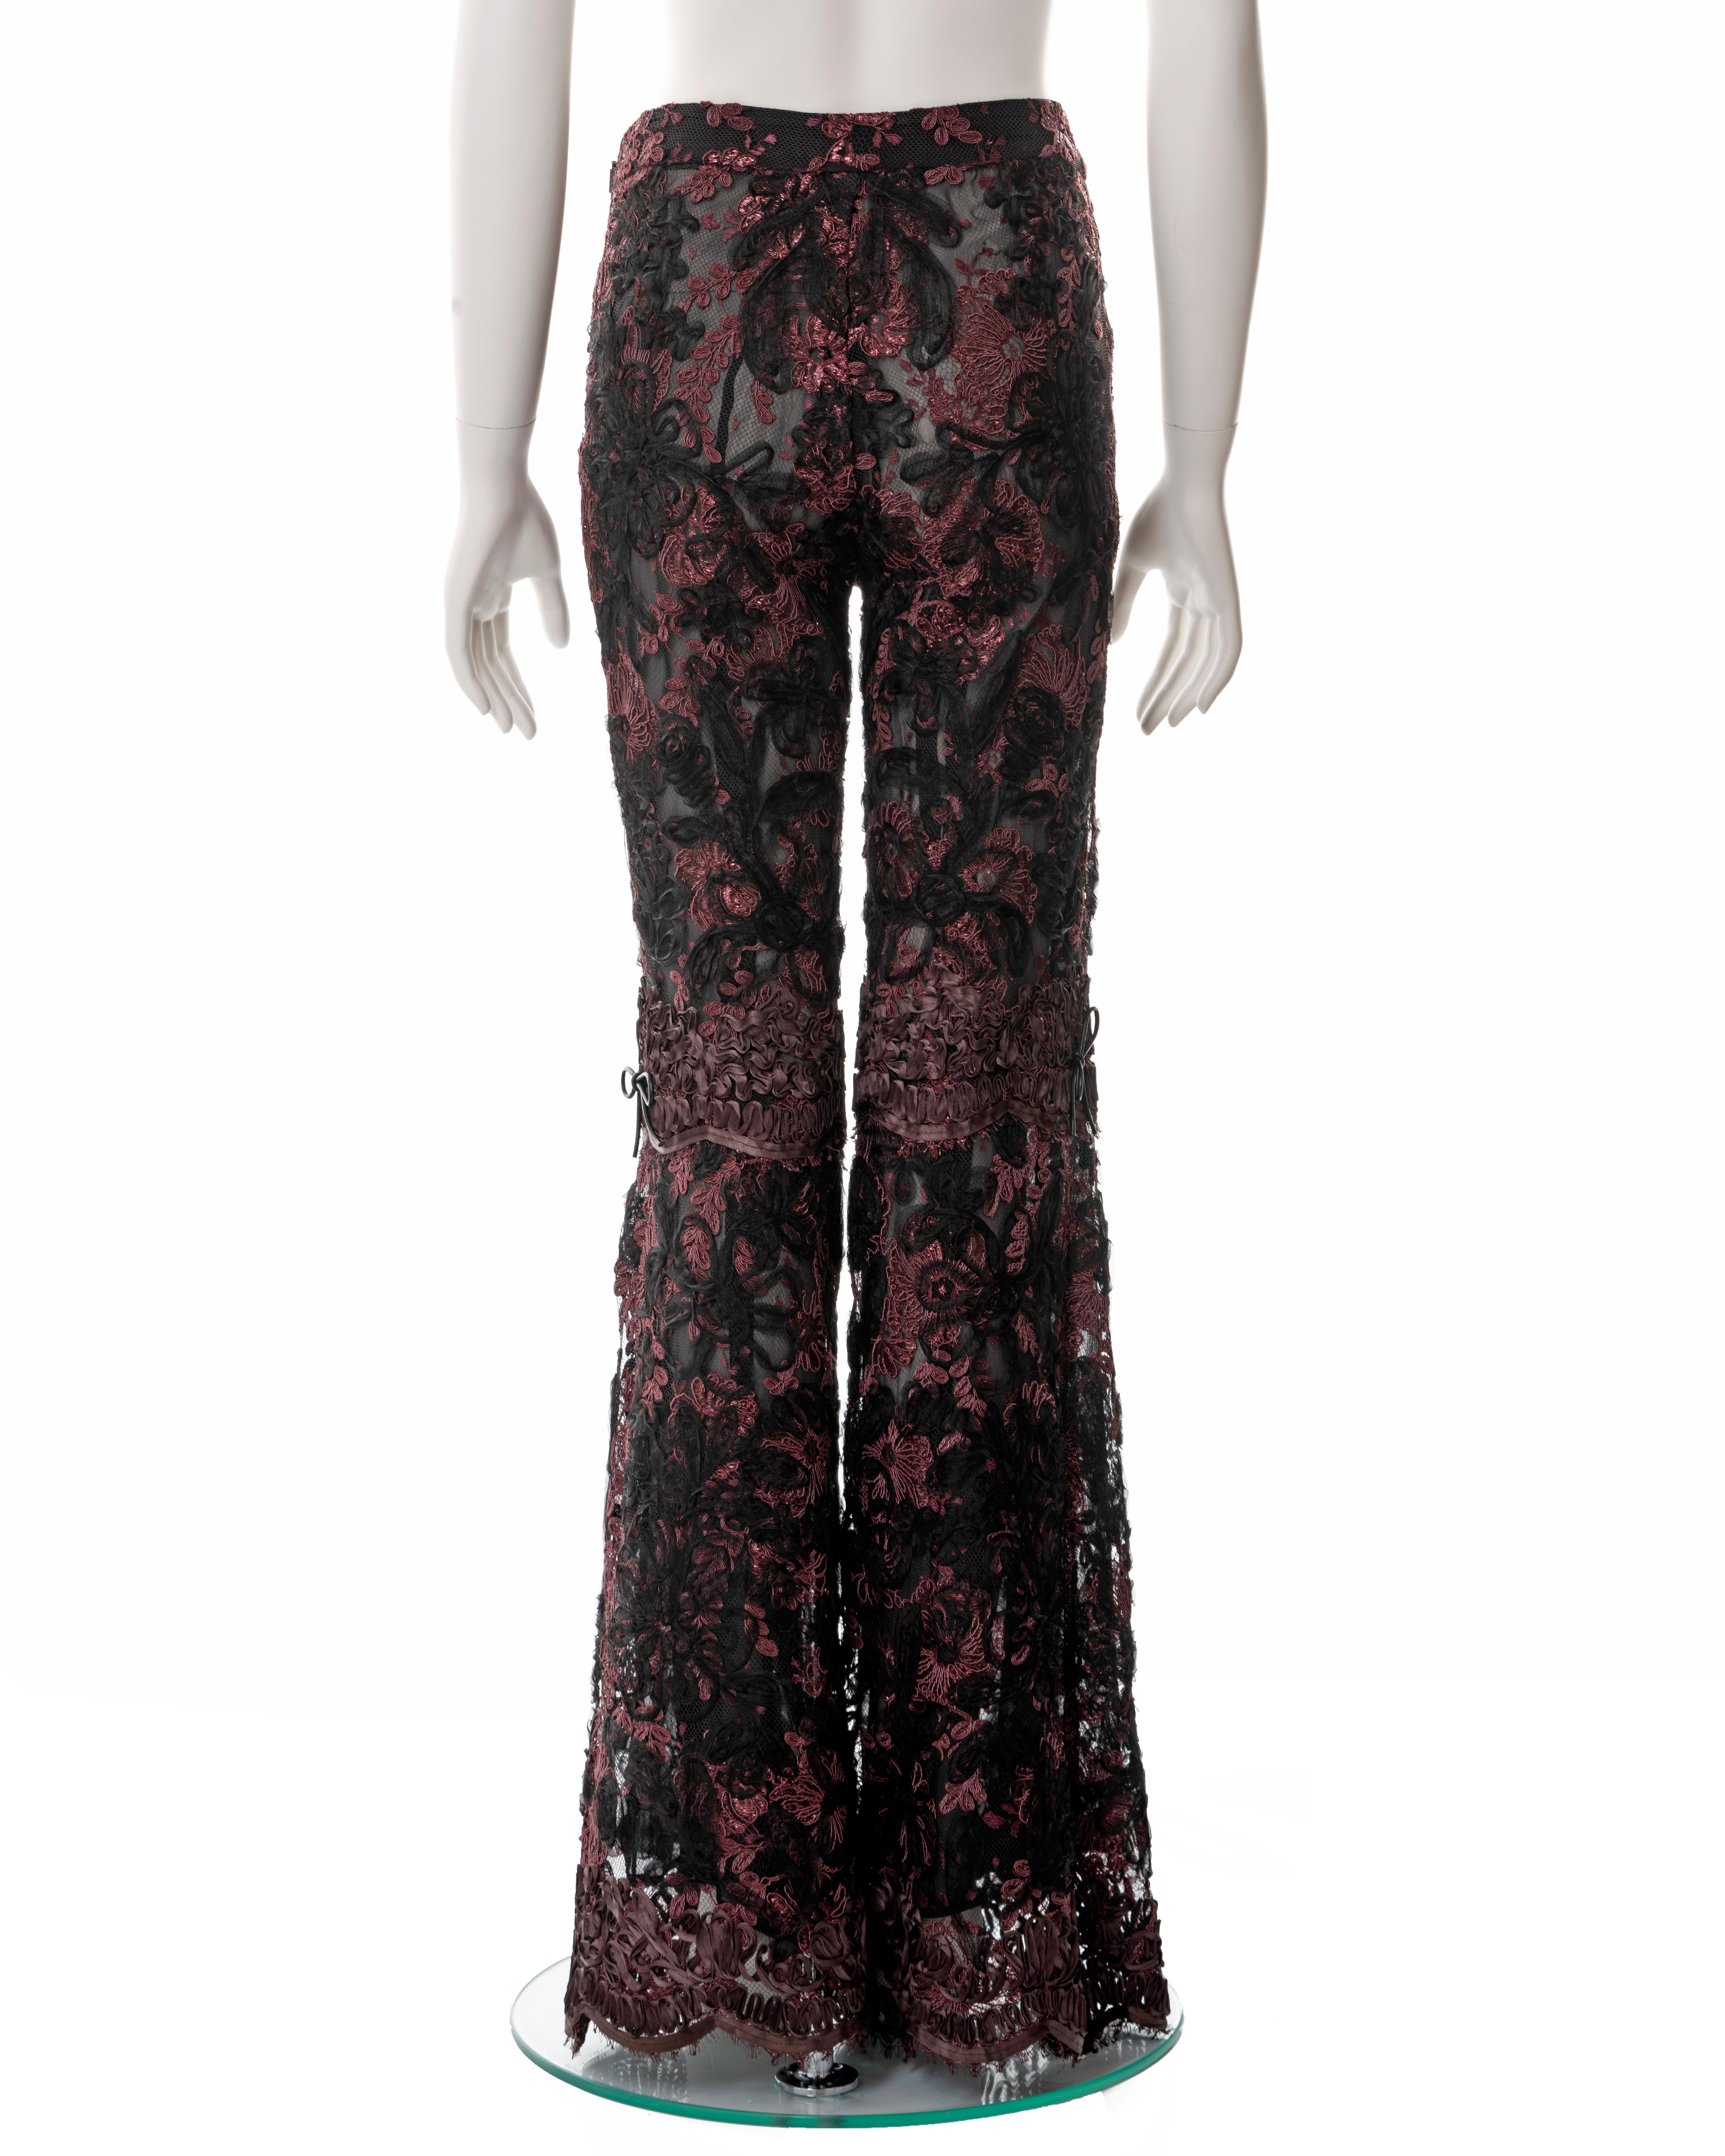 Gucci by Tom Ford burgundy lamé floral lace flared evening pants, fw 1999 For Sale 2